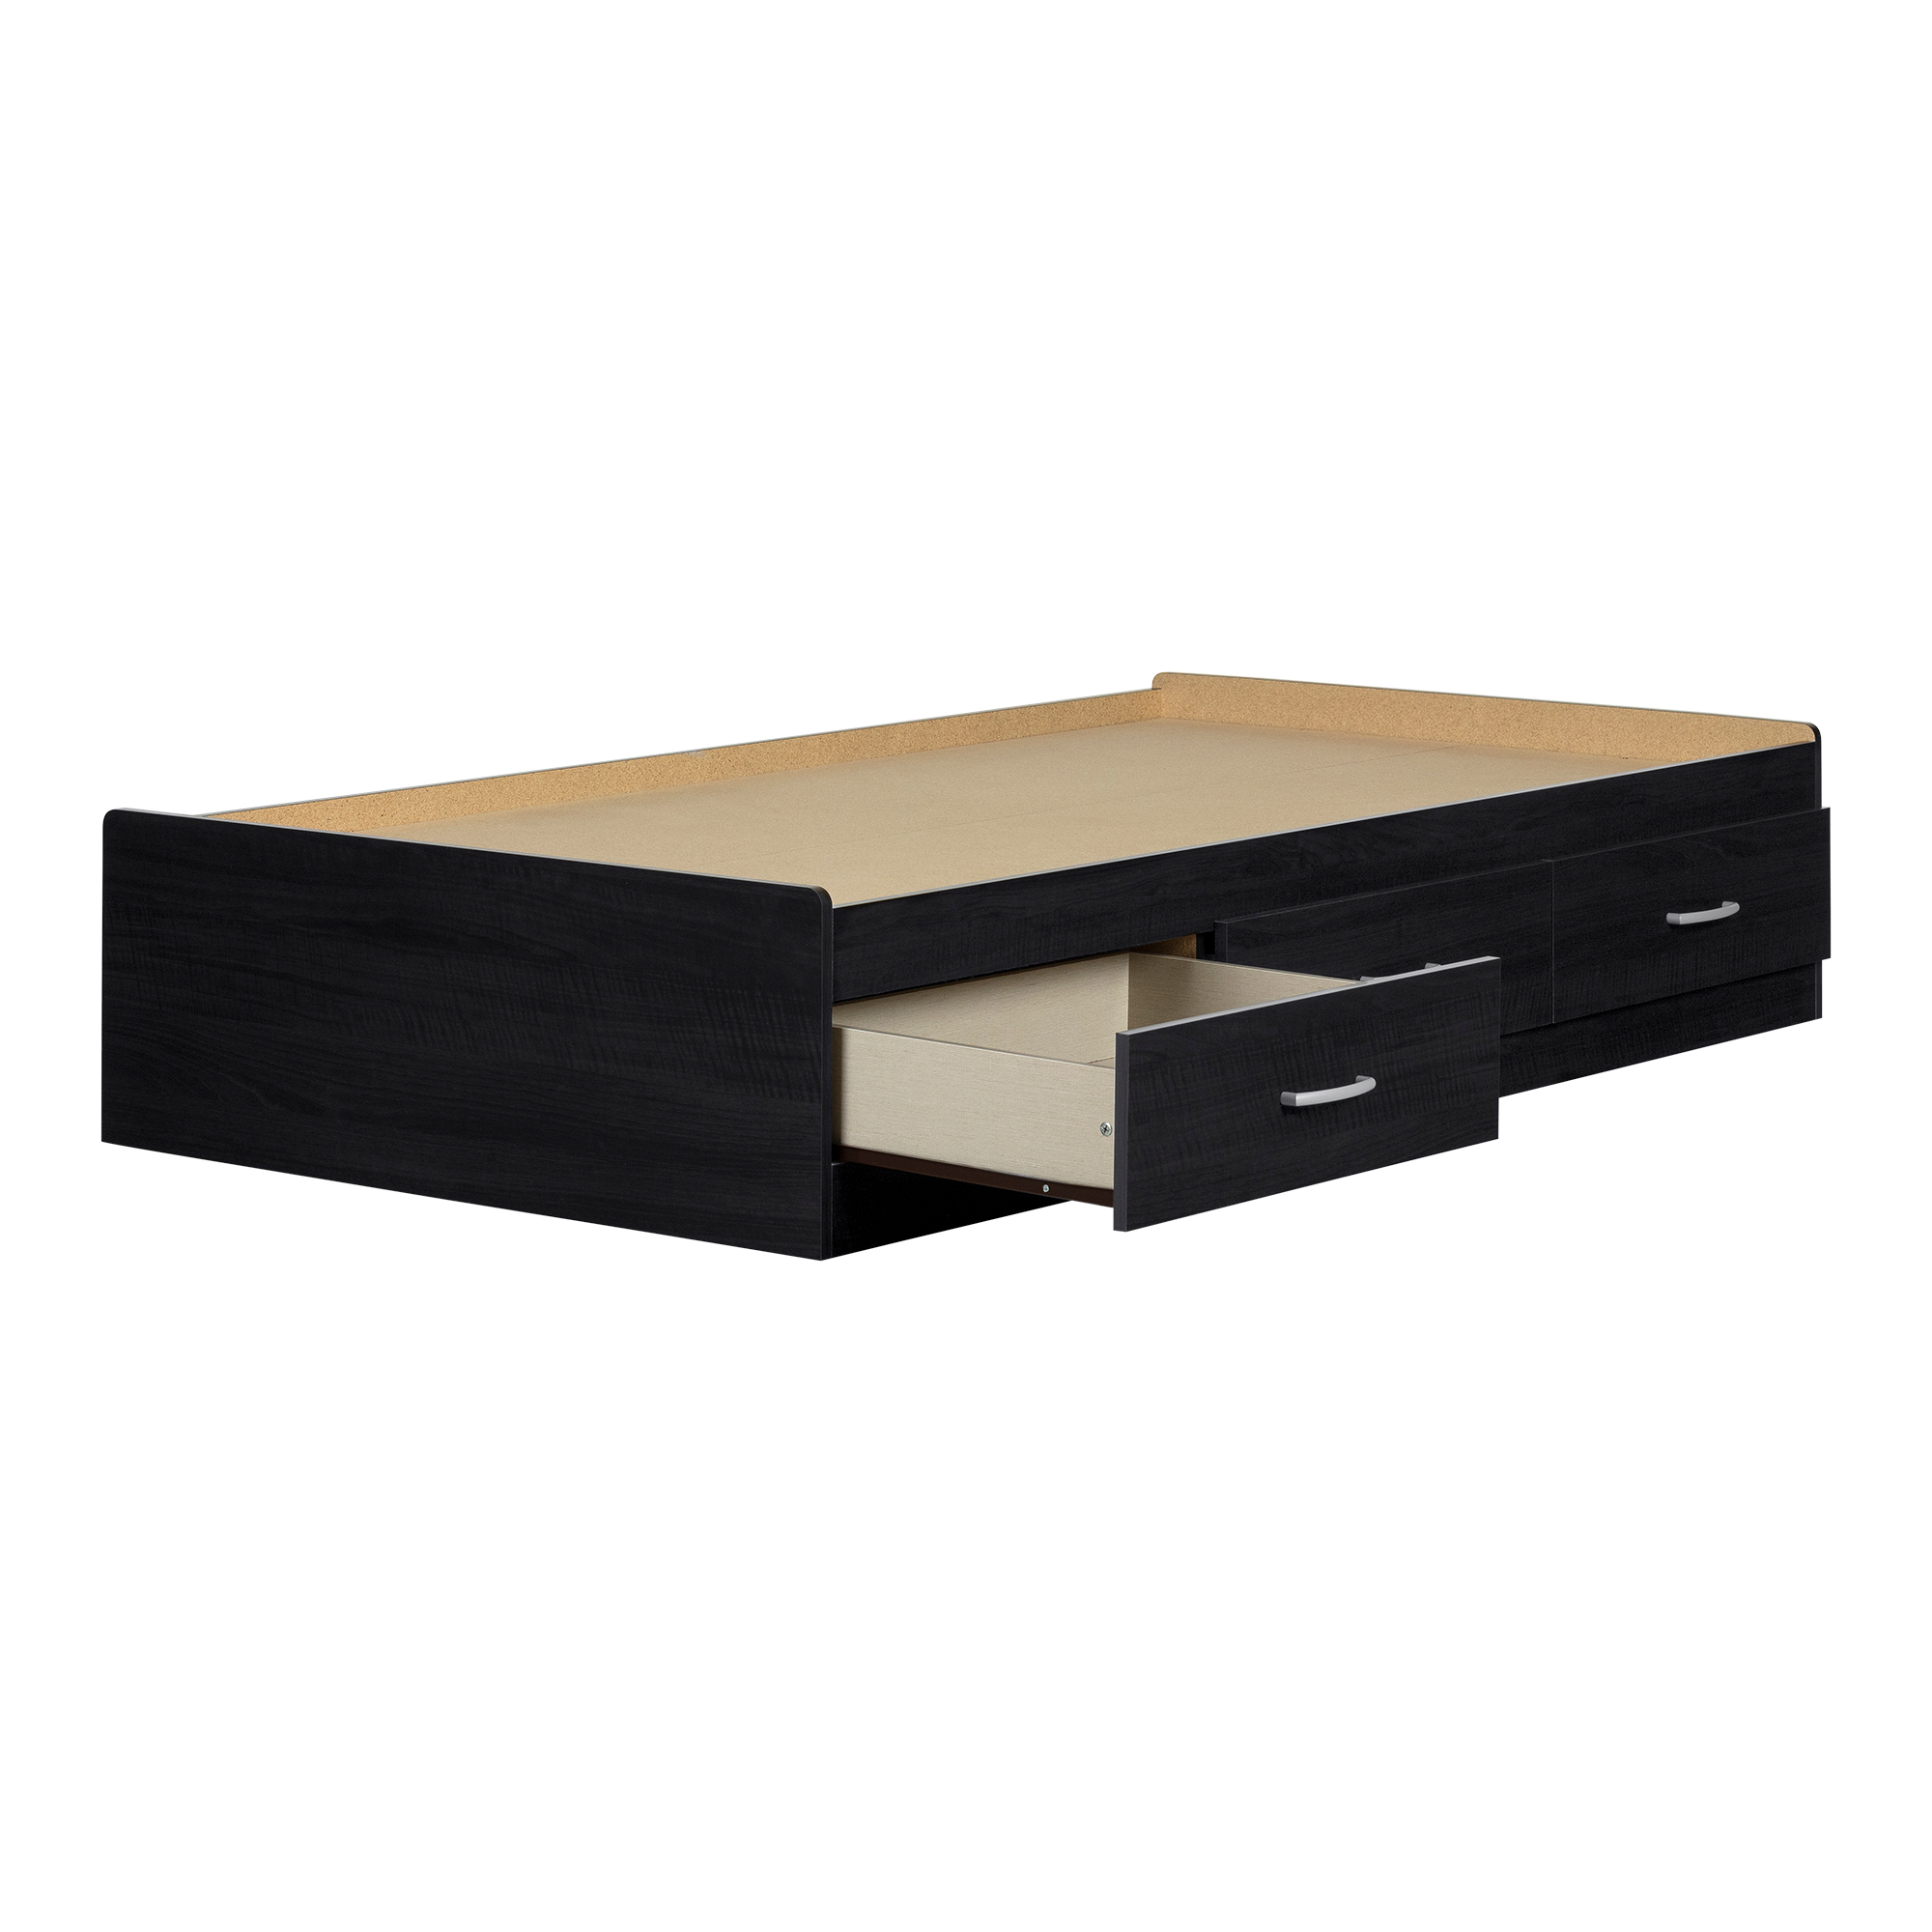 South Shore Cosmos 3-Drawer Storage Bed, Twin Black Onyx - image 2 of 9